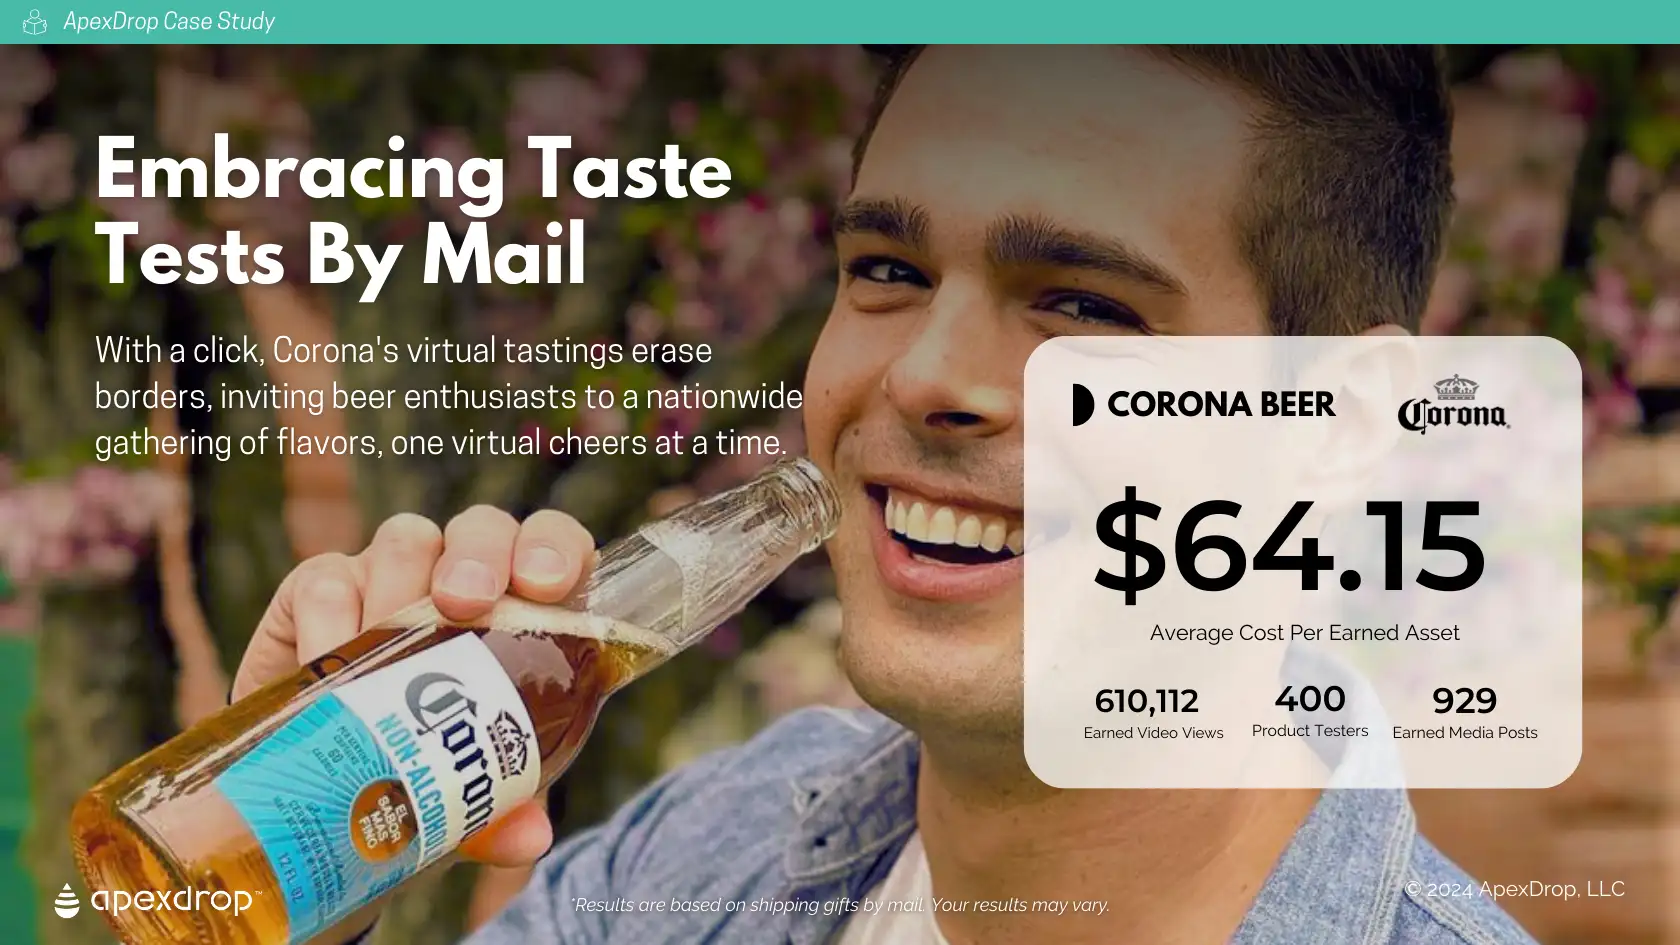 Embracing Taste Tests by Mail - With a click, Coronoa's virtual tastings erase borders, inviting beer enthusiasts to a nationwide gathering of flavors, one virtual cheer at a time.